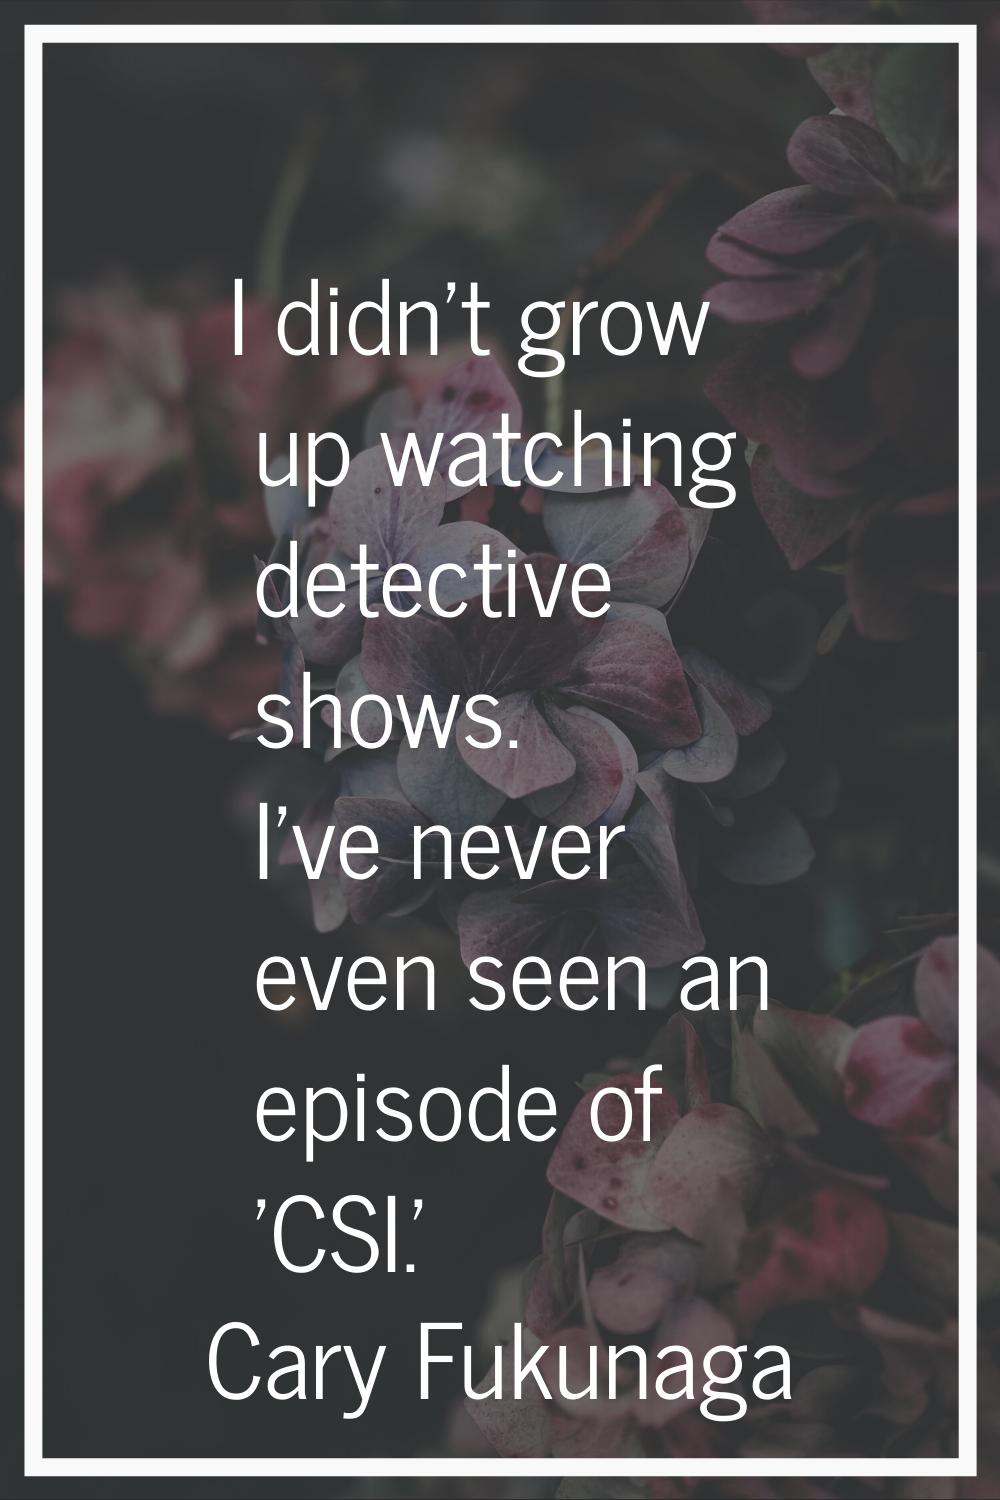 I didn't grow up watching detective shows. I've never even seen an episode of 'CSI.'